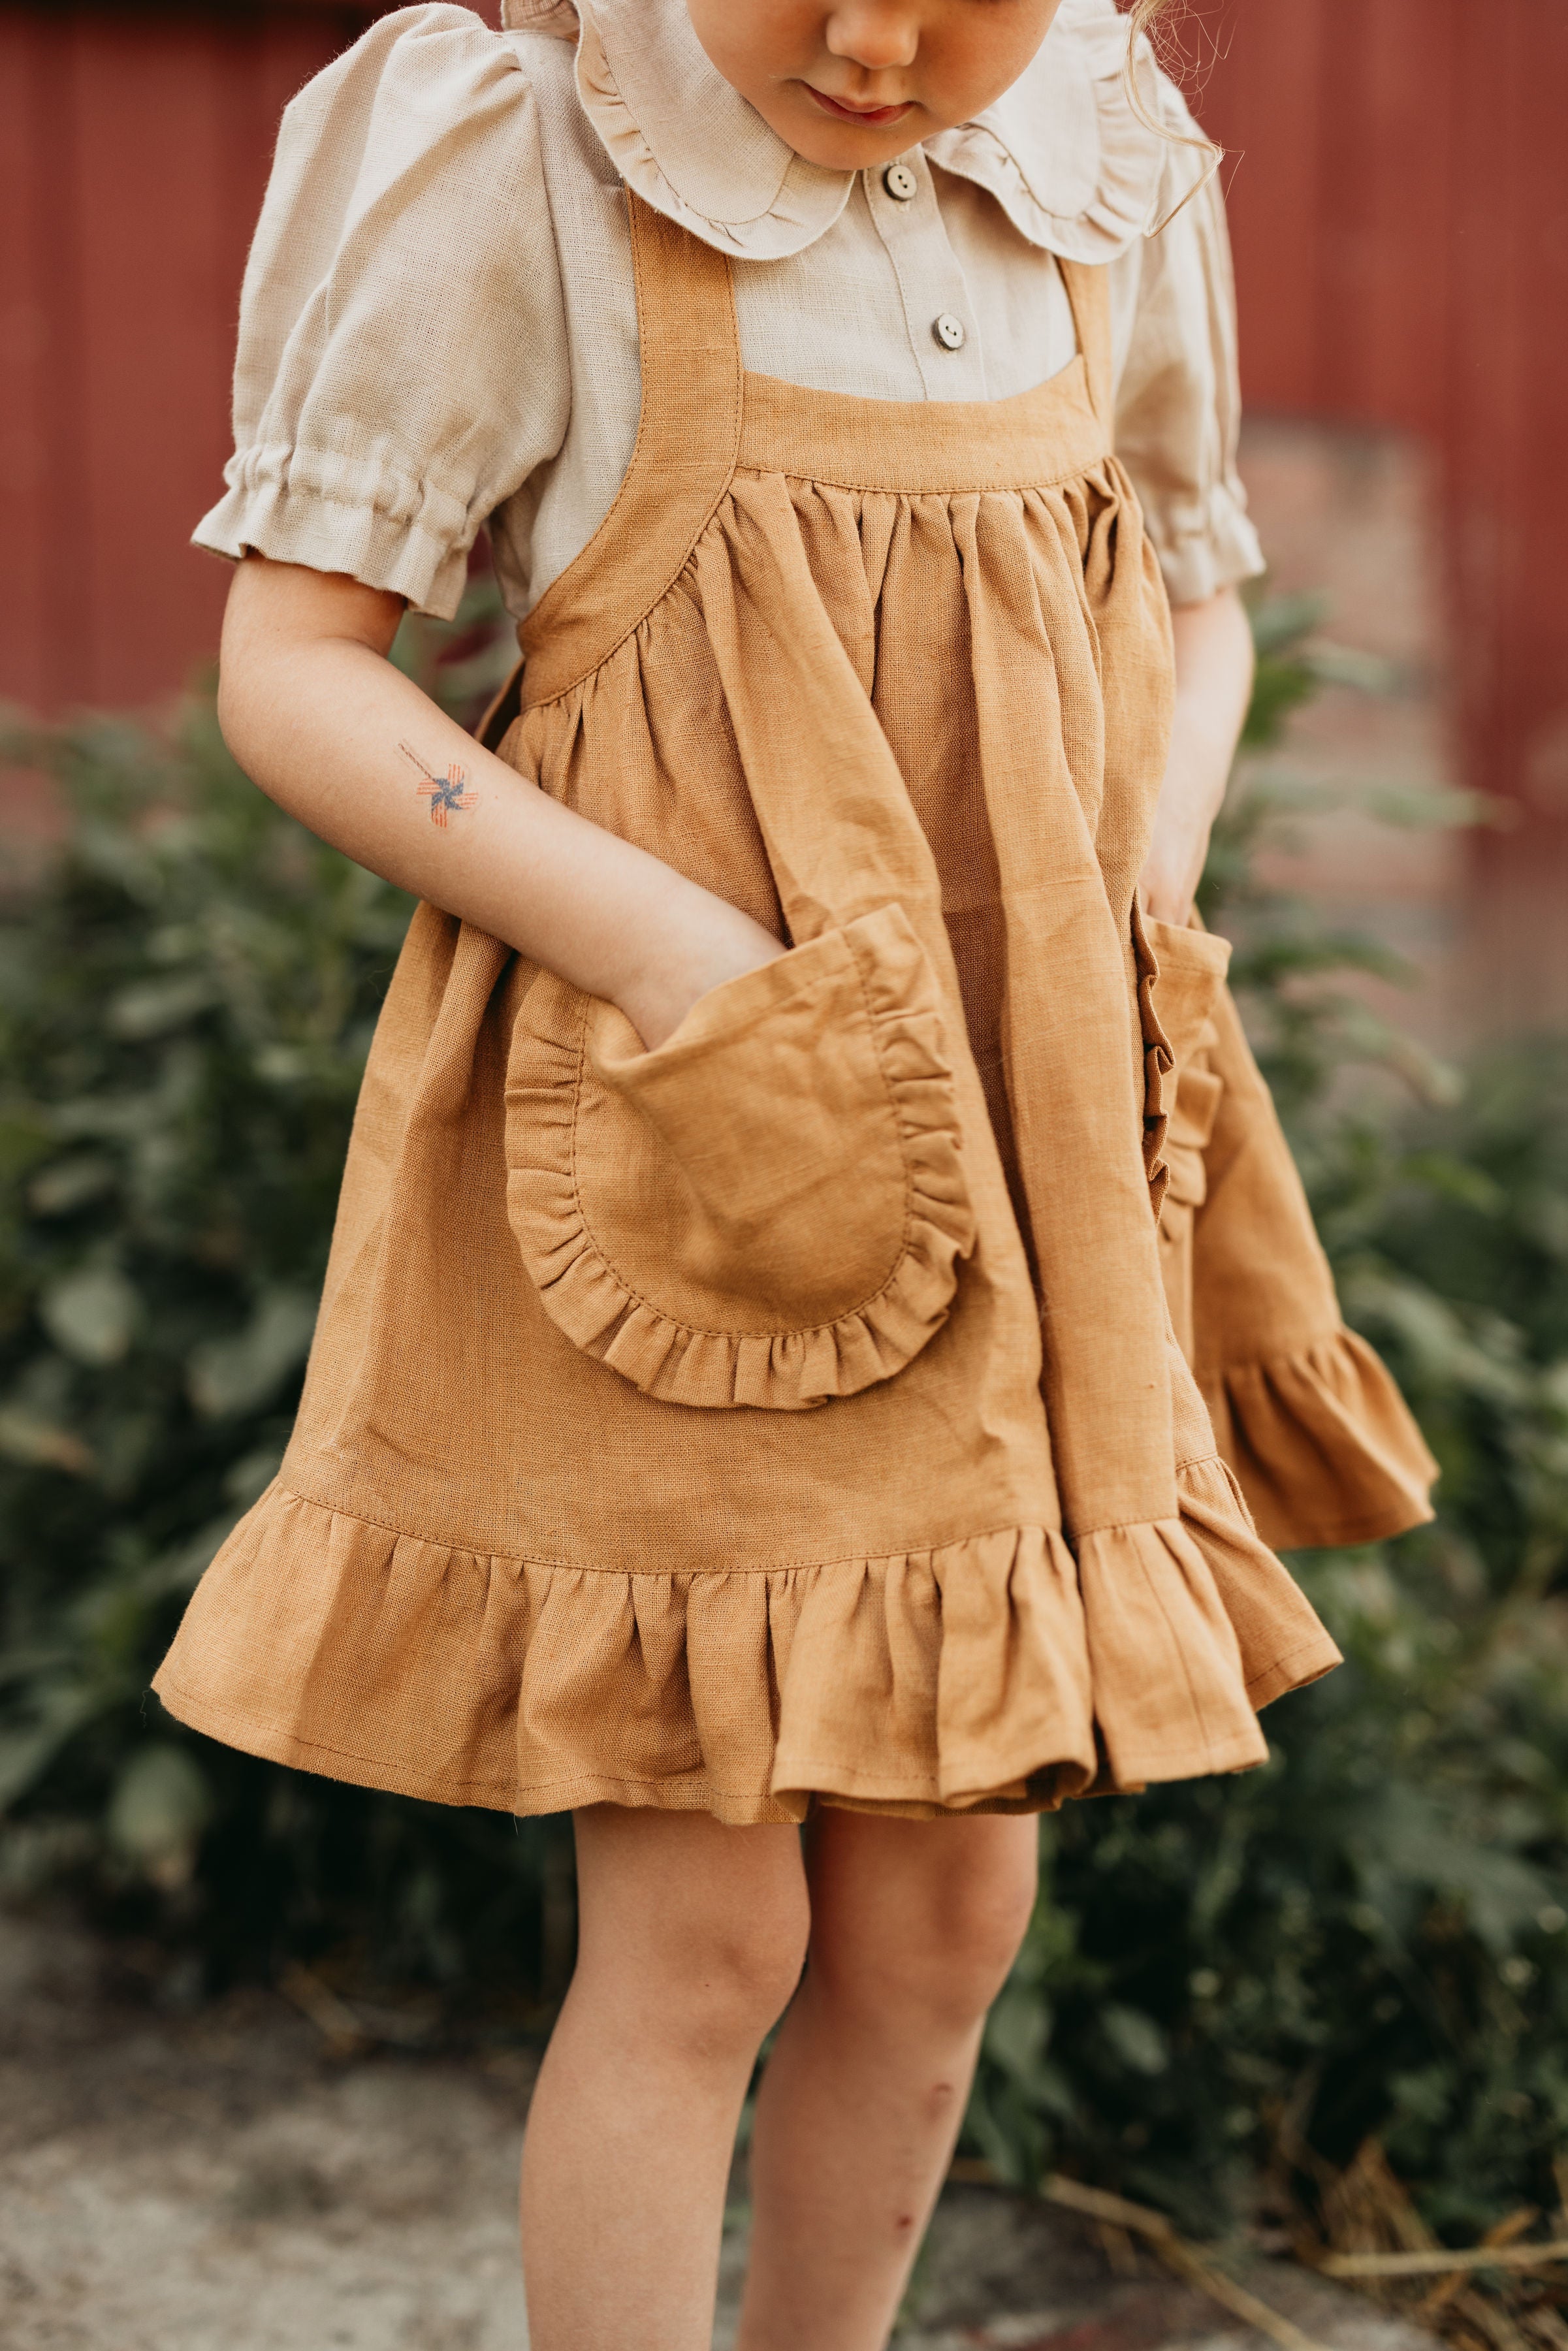 Blush & Cream Gingham Linen Straps Pinafore with Frills